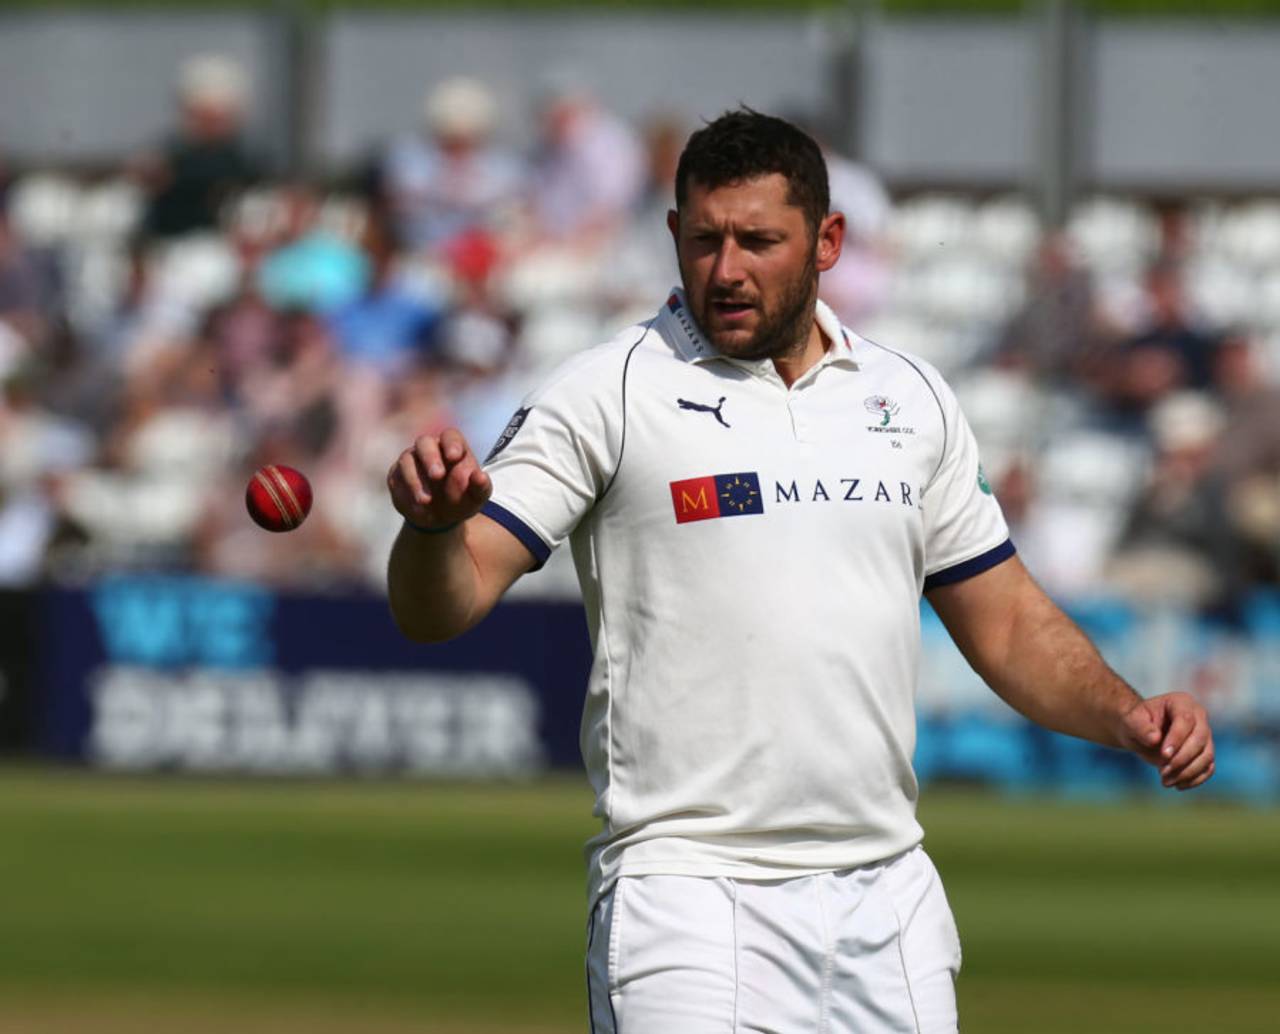 Tim Bresnan was in the wickets for Yorkshire, Essex v Yorkshire, Chelmsford, Specsavers Championship Division One, Chelmsford, May 4, 2018